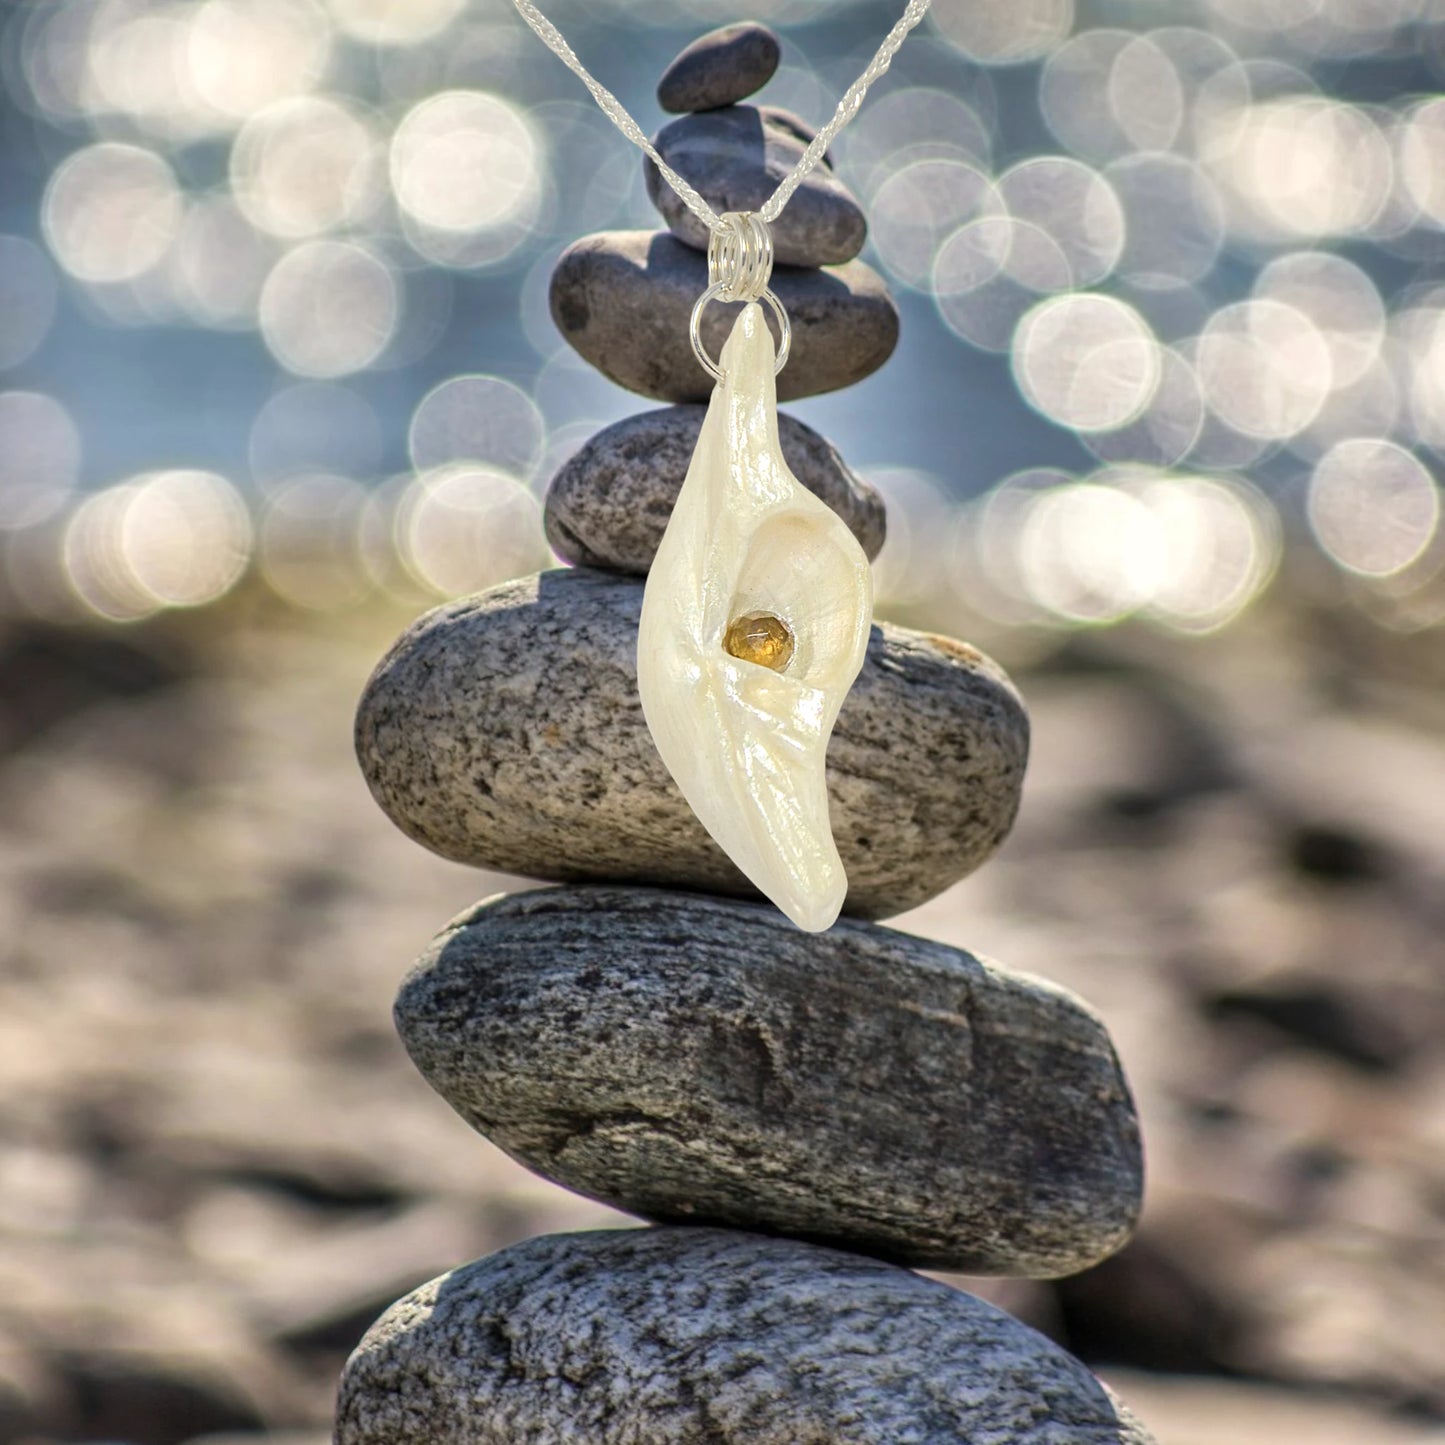 Seer is a natural seashell pendant with a beautiful 5mm rose cut Smokey Quartz compliments the pendant. The pendant is hanging over several rocks that have been stacked one on top of the other.